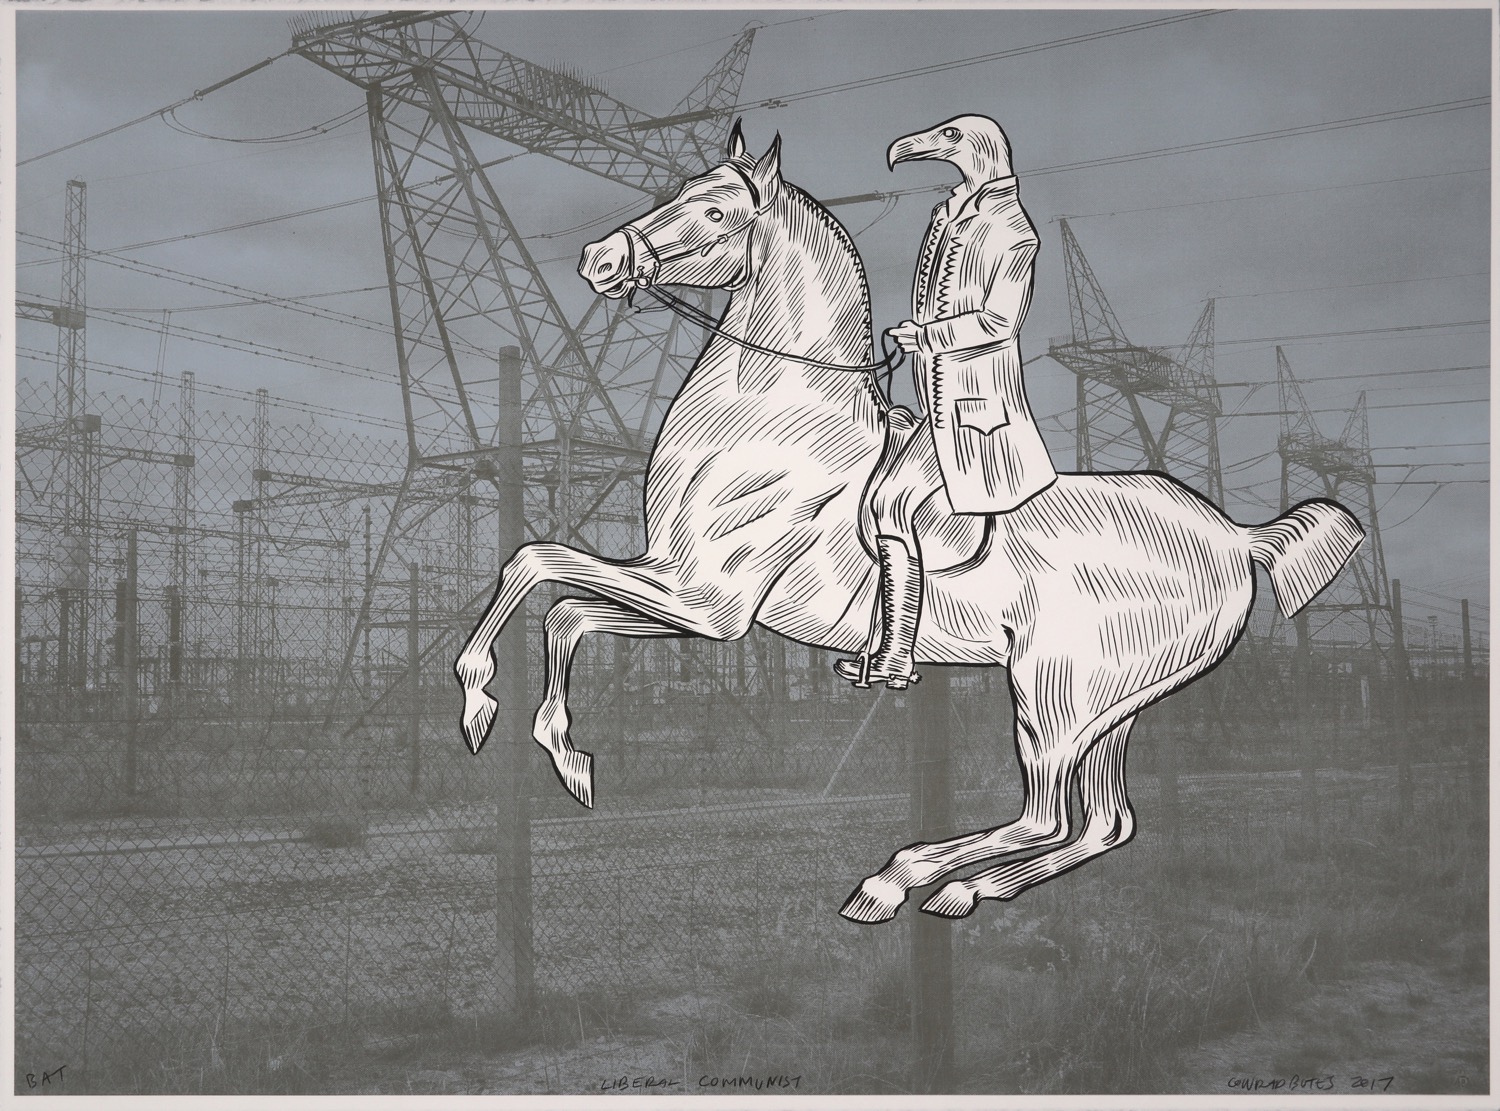 Vulture headed man on horseback with electrical power transmission station in the background